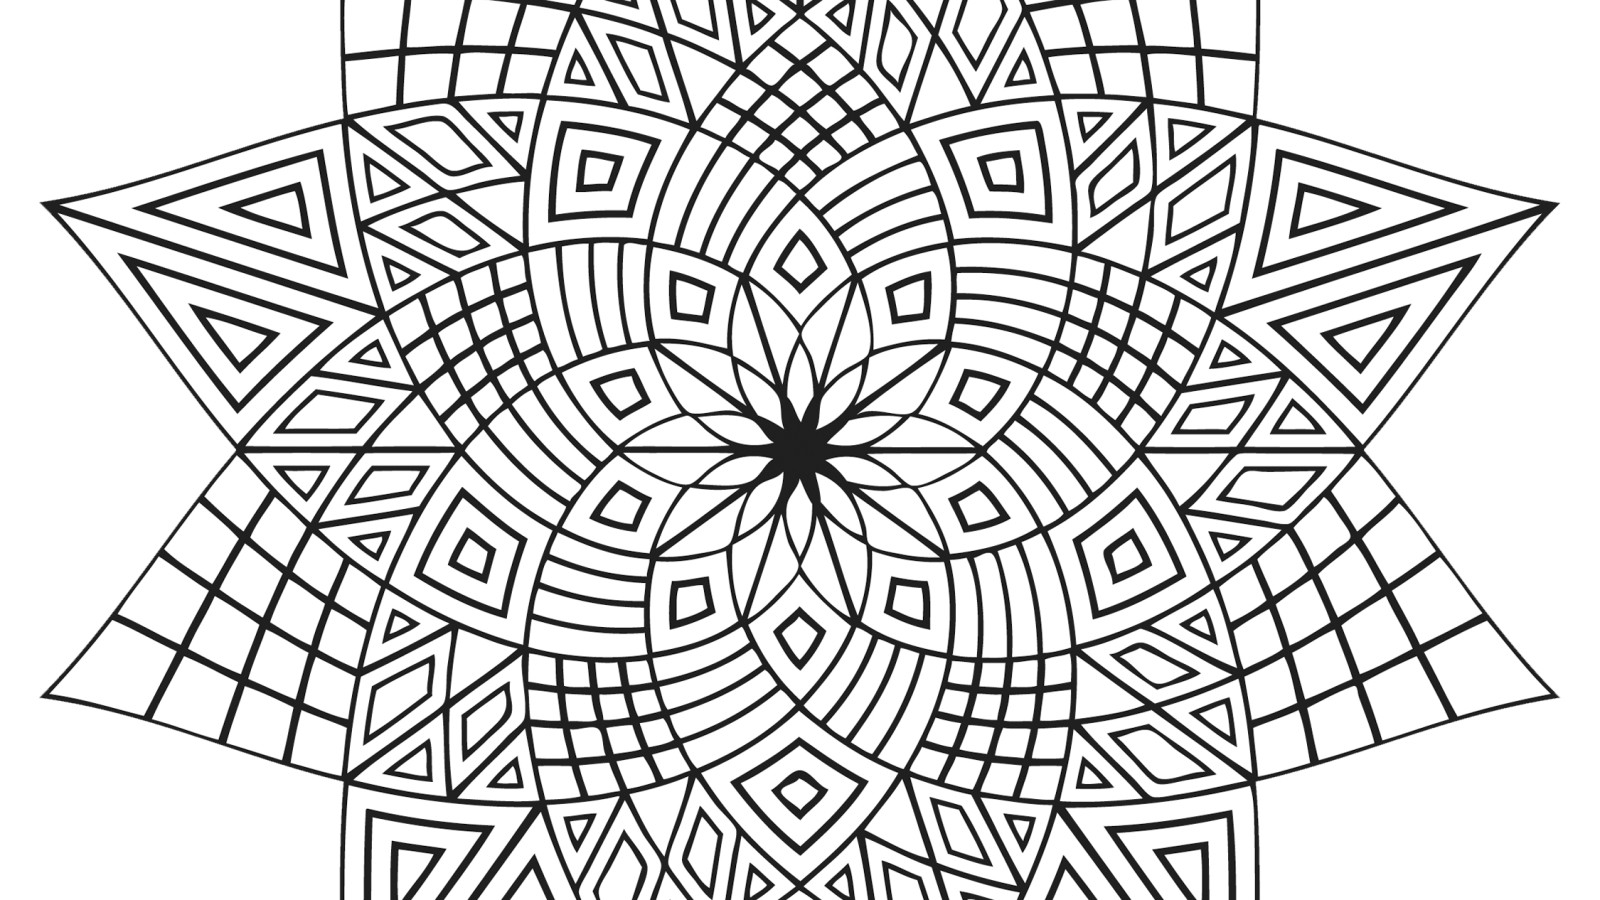 Geometric Adult Coloring Page Archives - Coloring Page For Kids